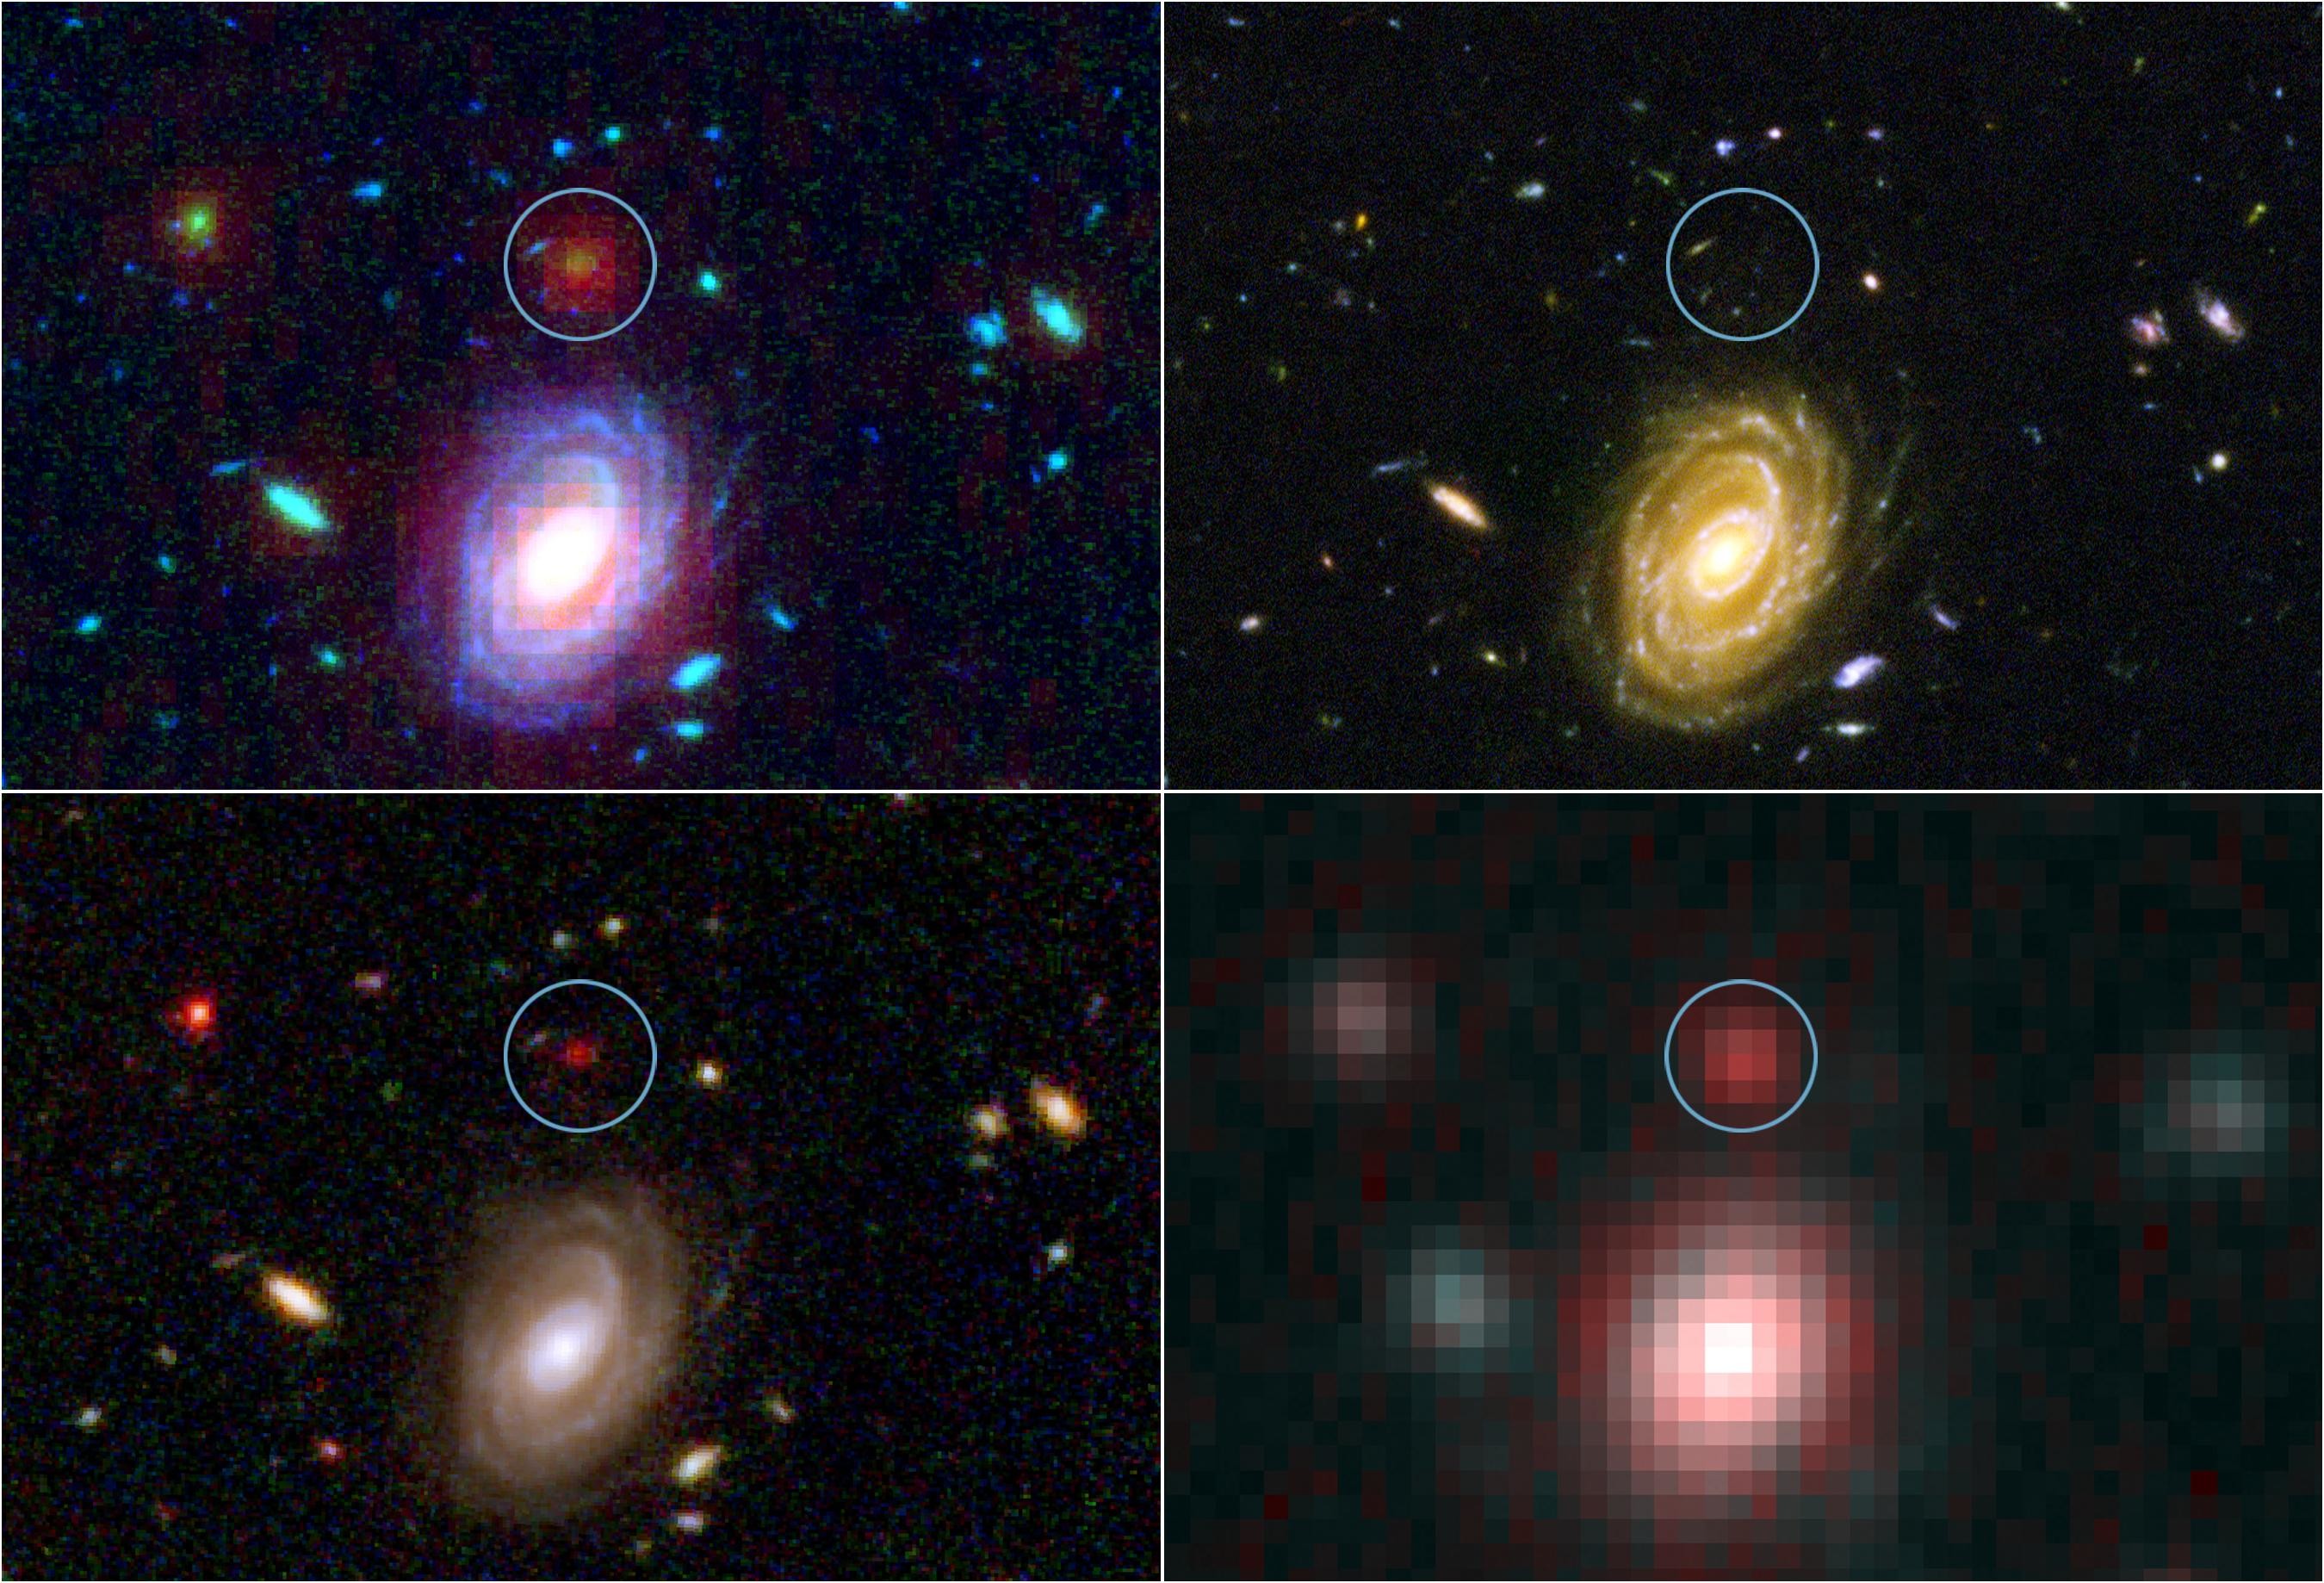 2699x1838 This image demonstrates how data from two of NASA's Great Observatories,  the Spitzer and Hubble